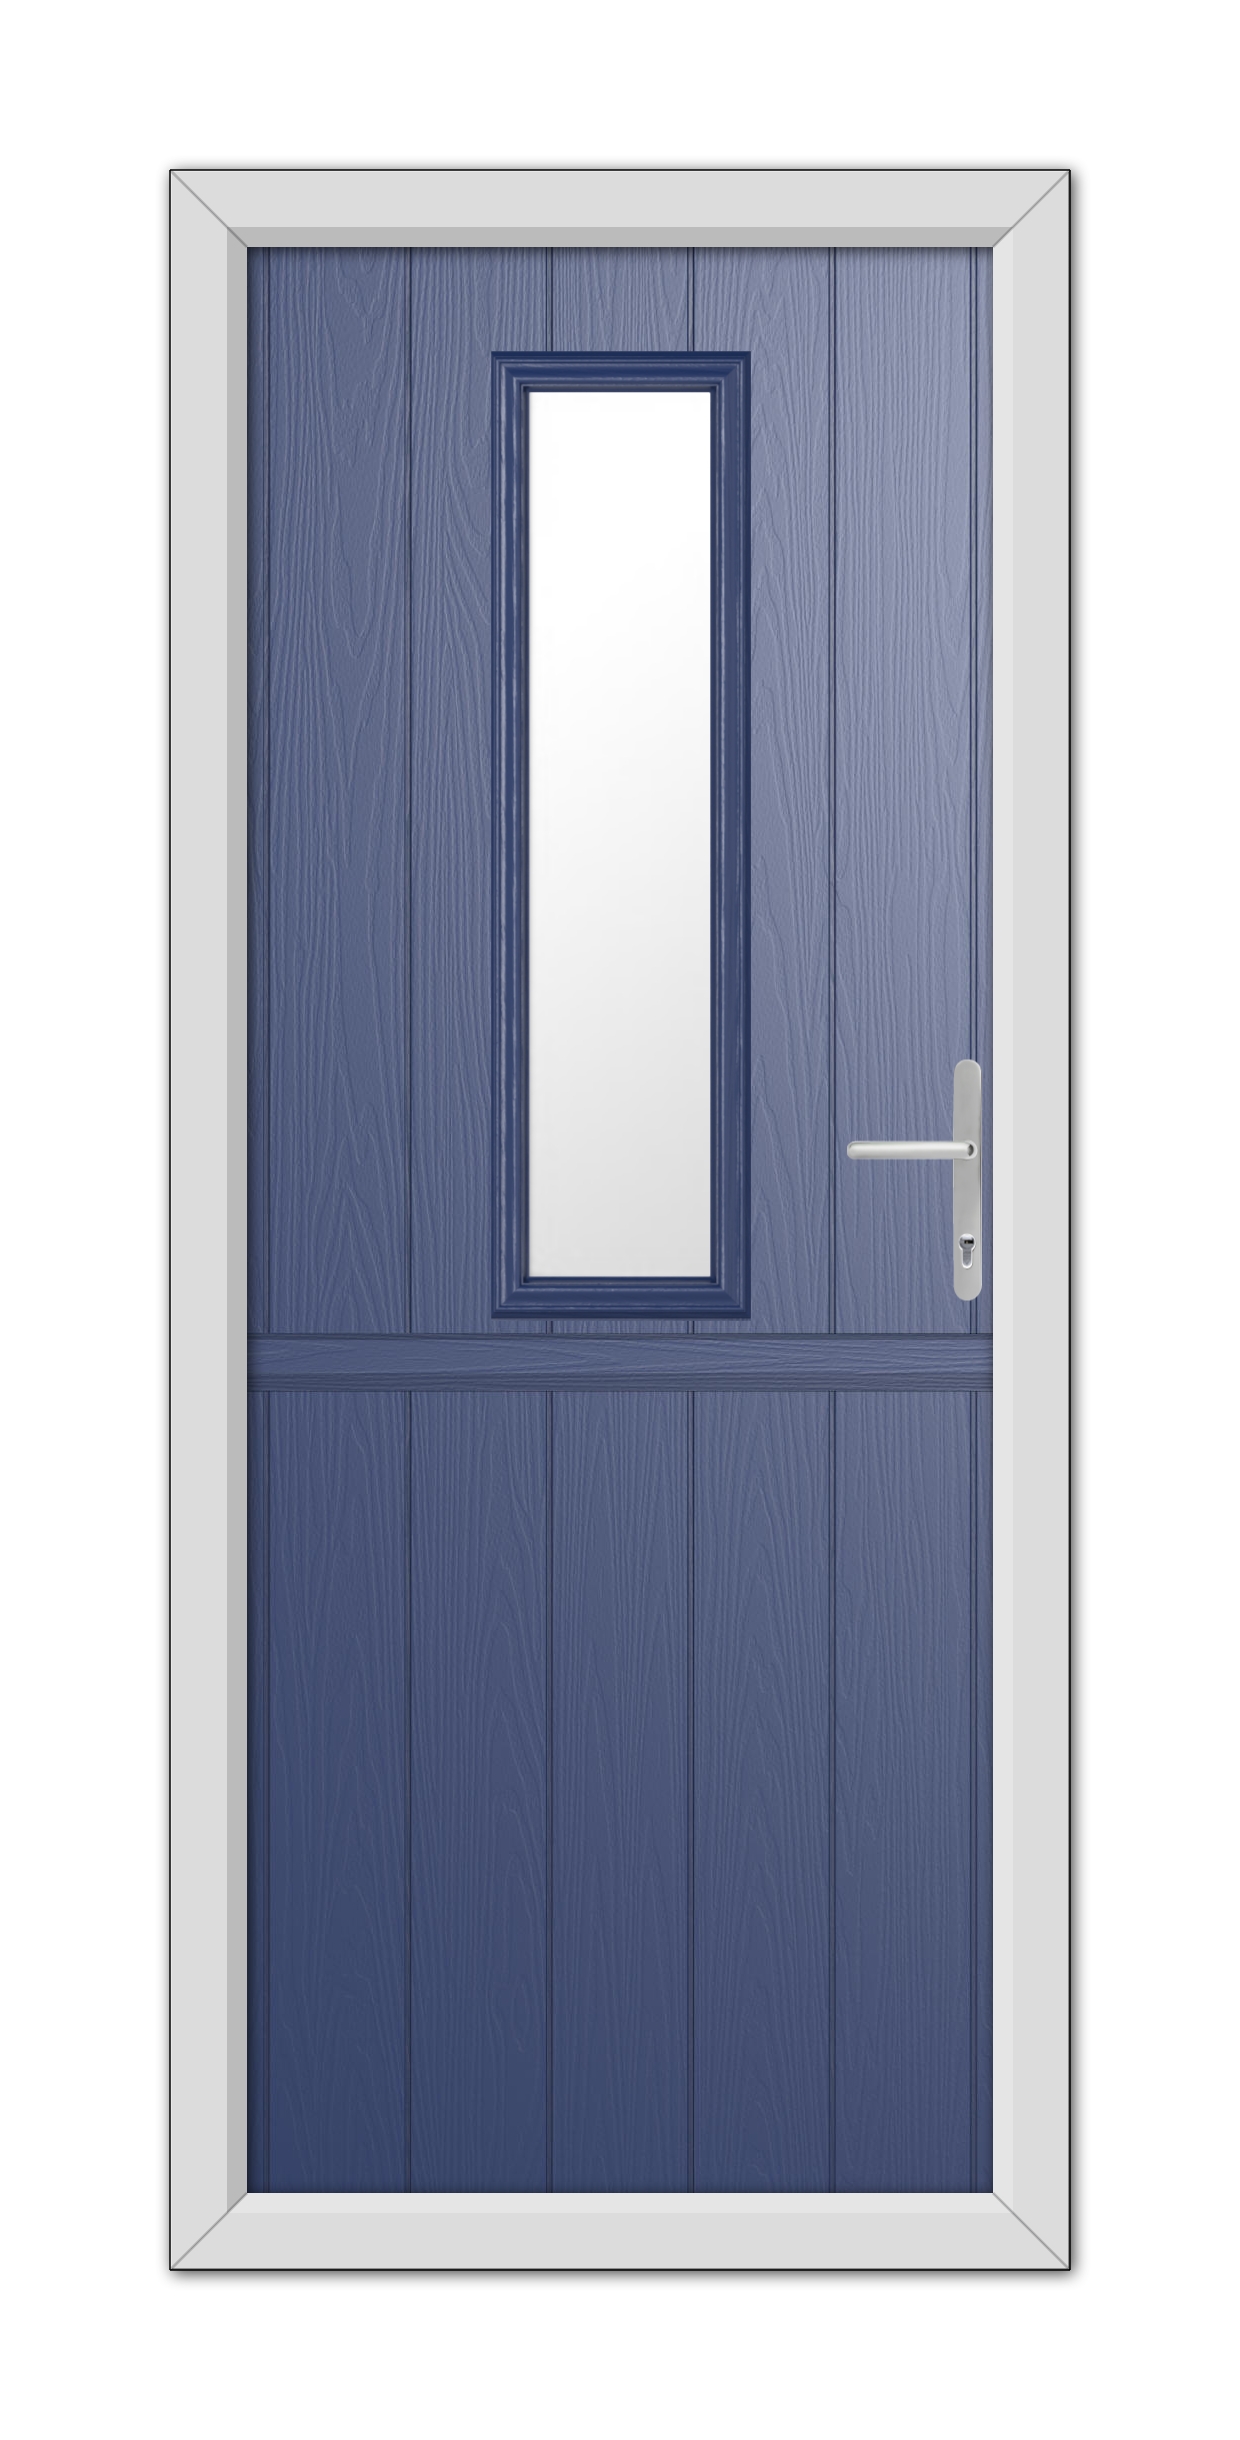 A Blue Mowbray Stable Composite Door 48mm Timber Core with a vertical rectangular window and a silver handle, set within a white frame.